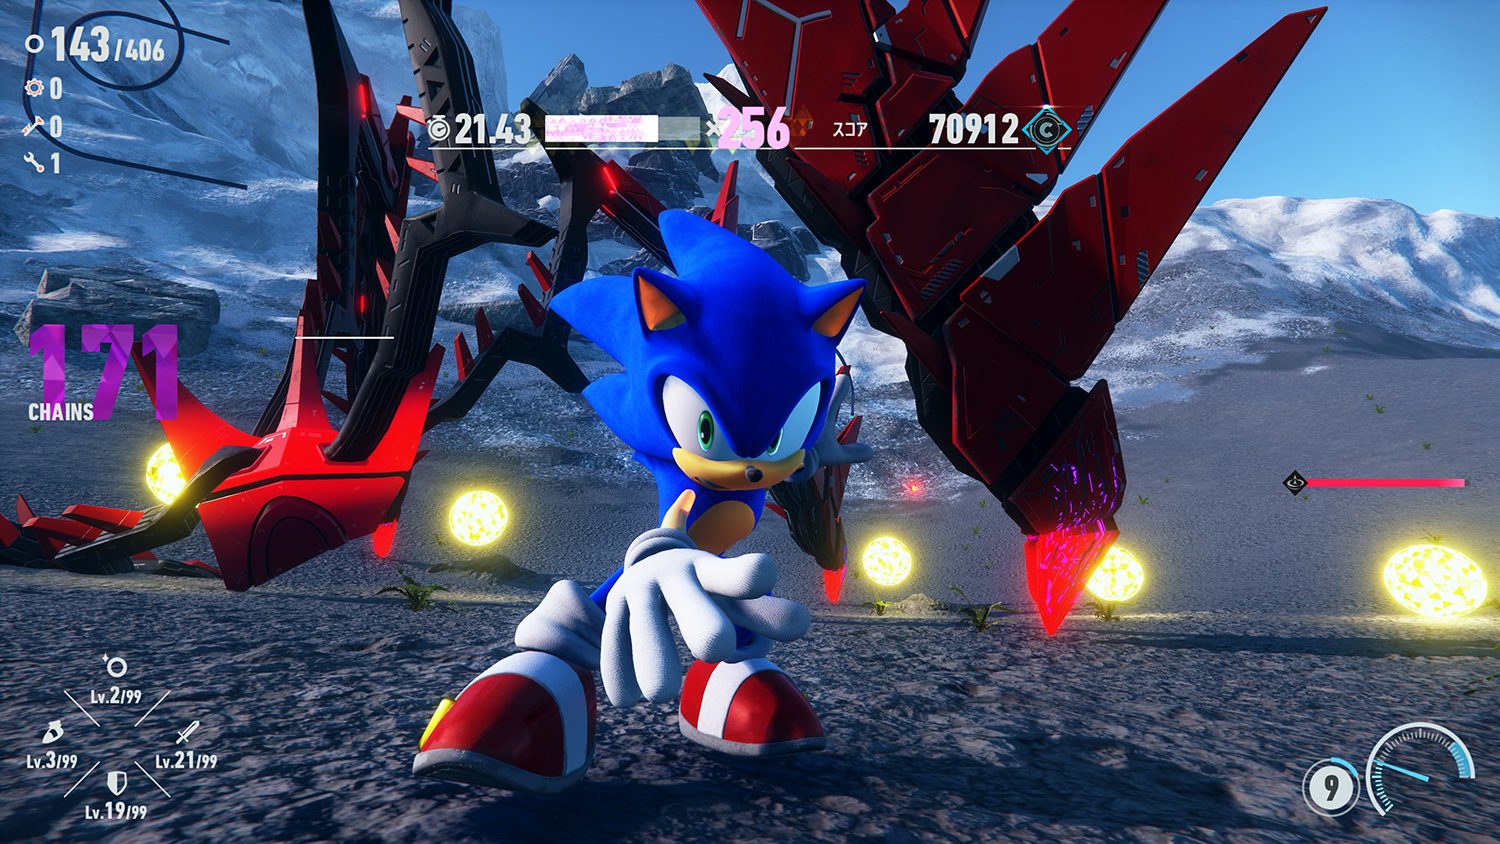 LEGO Dr. Eggman invades another Sonic the Hedgehog game